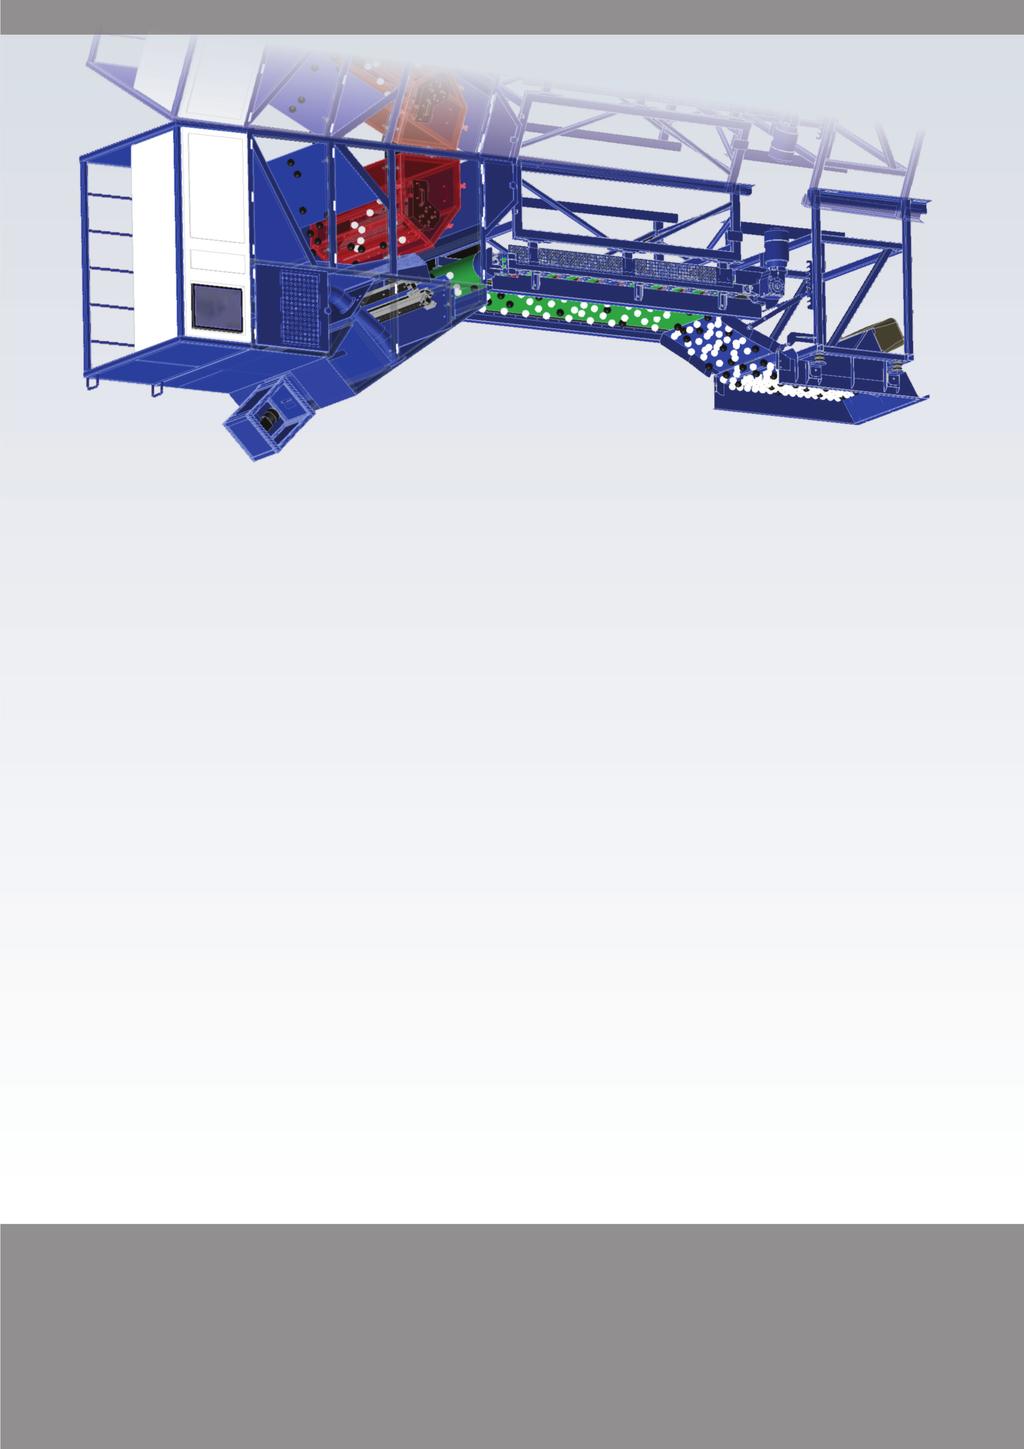 sorting The most important design features of the Comex separator which make this equipment unique are: + Vibrating feeder for particle dispersion providing good particle distribution + Belt conveyor